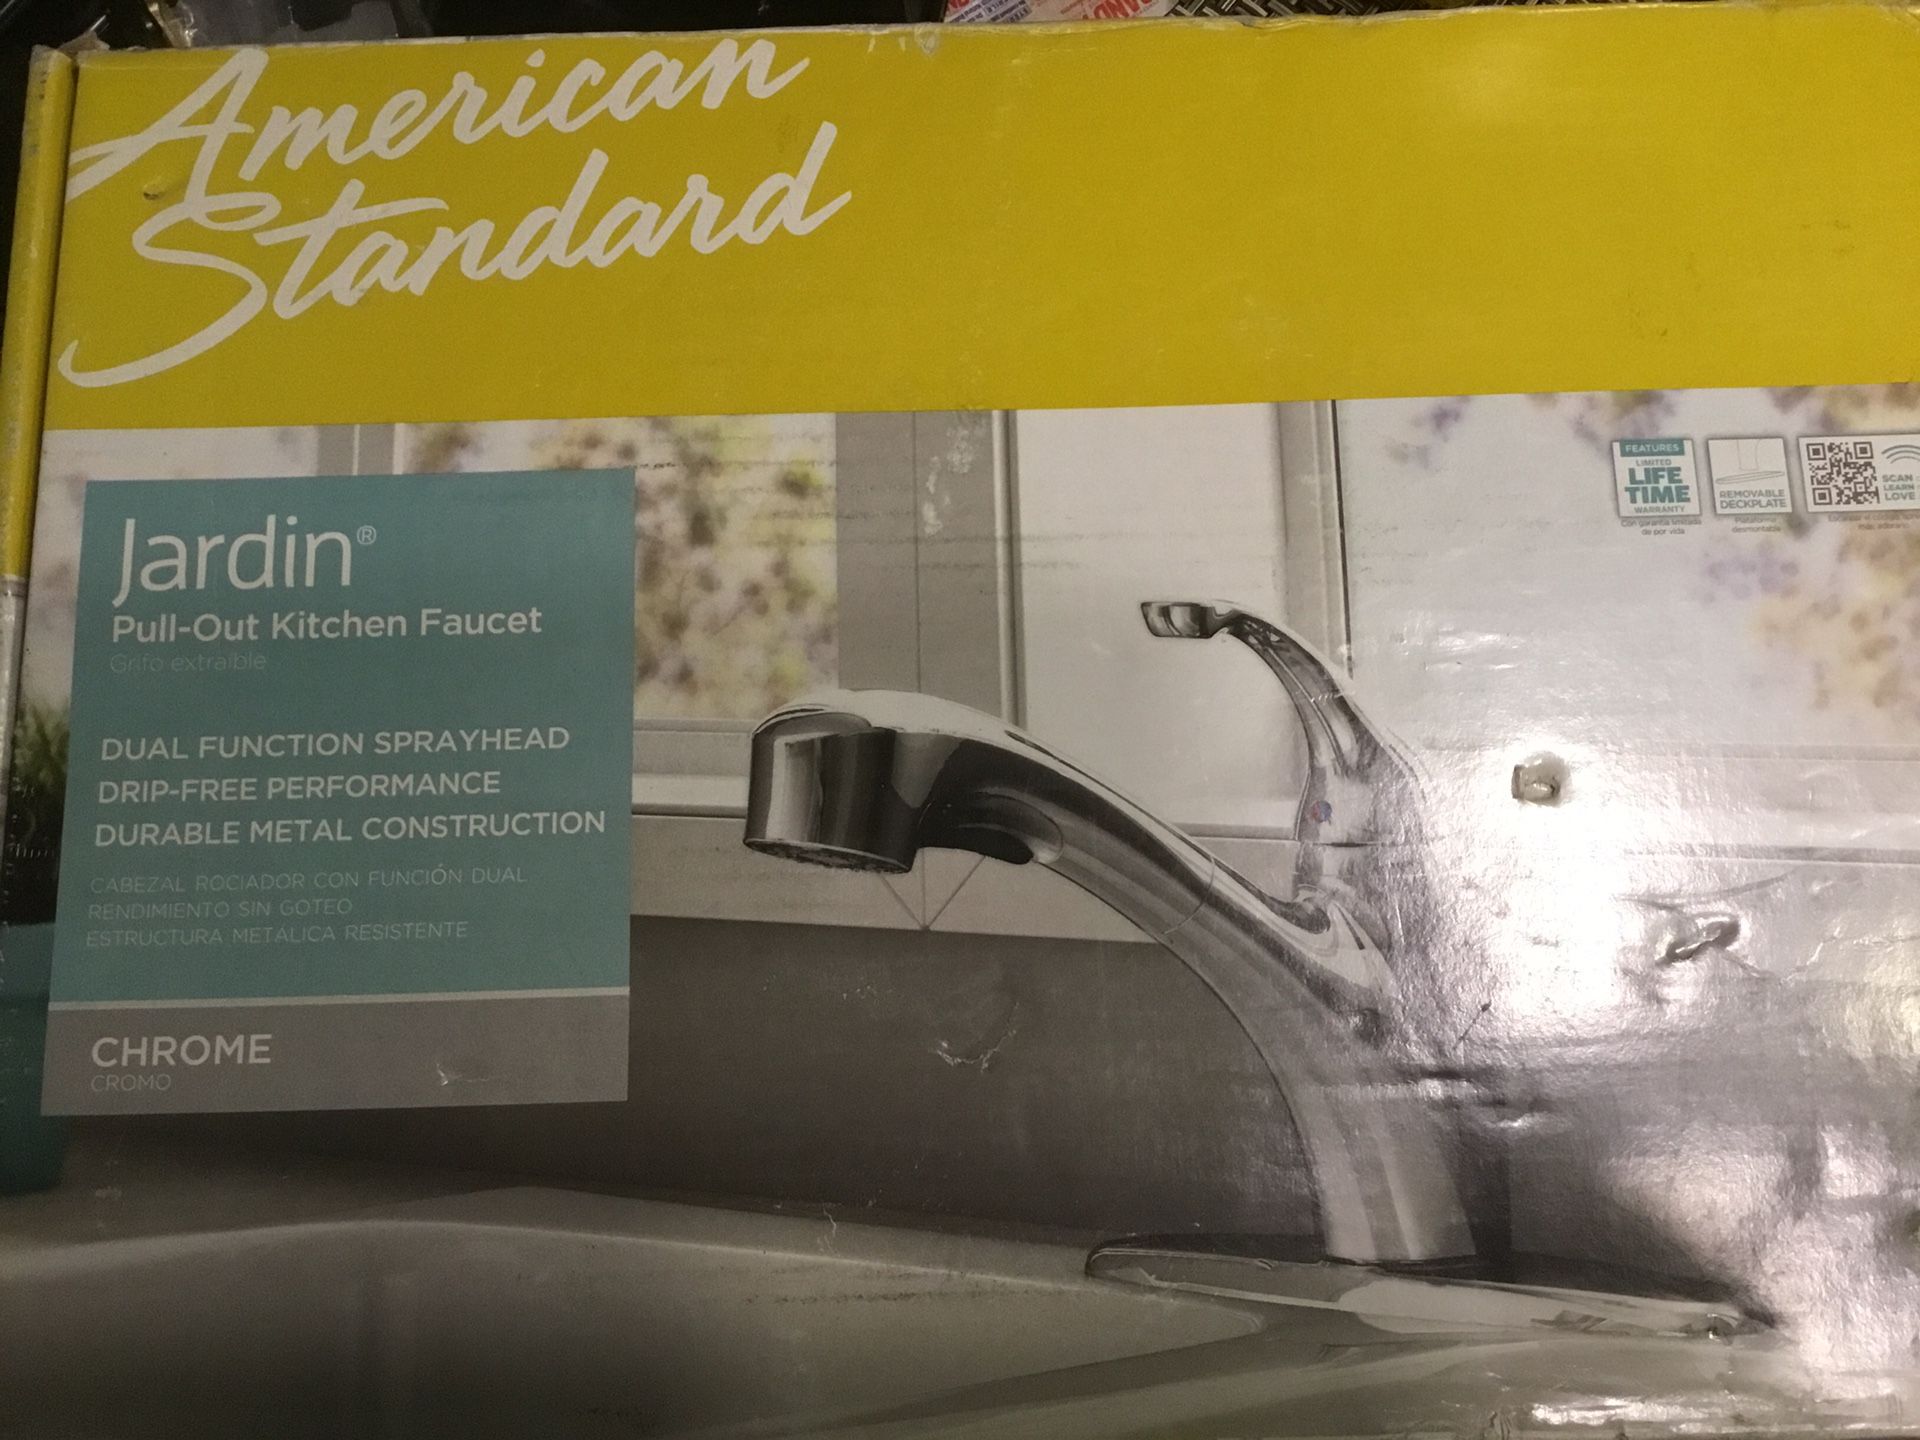 American standard Jardin pull out kitchen faucet chrome